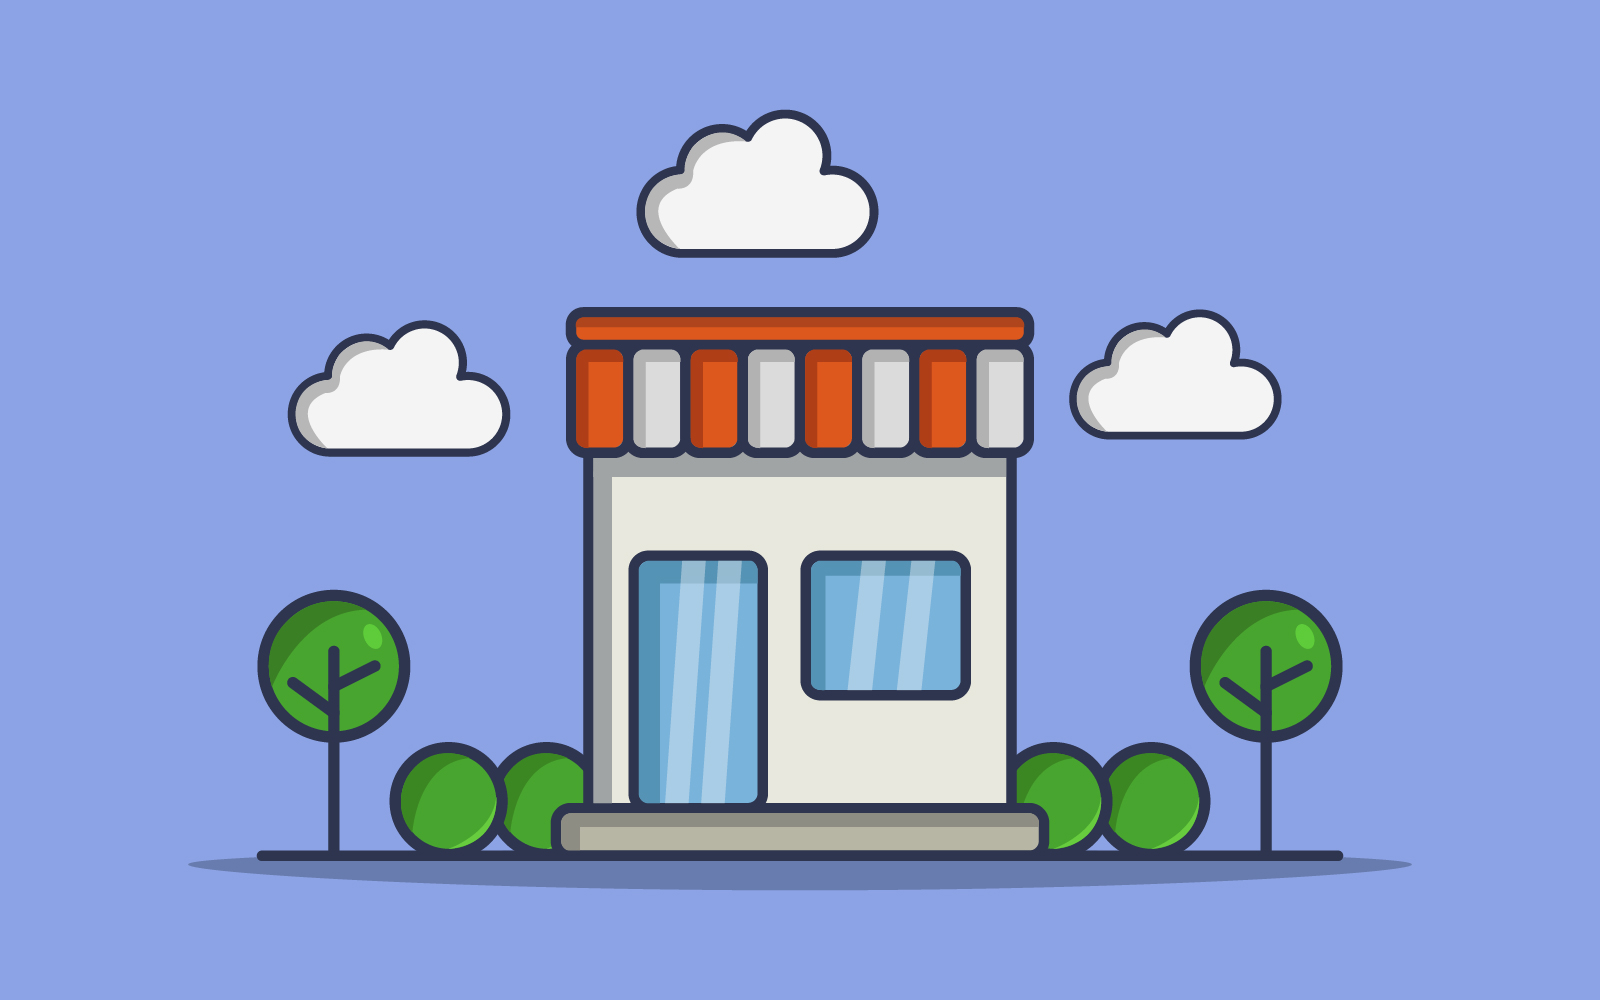 Shop illustrated in vector on a white background